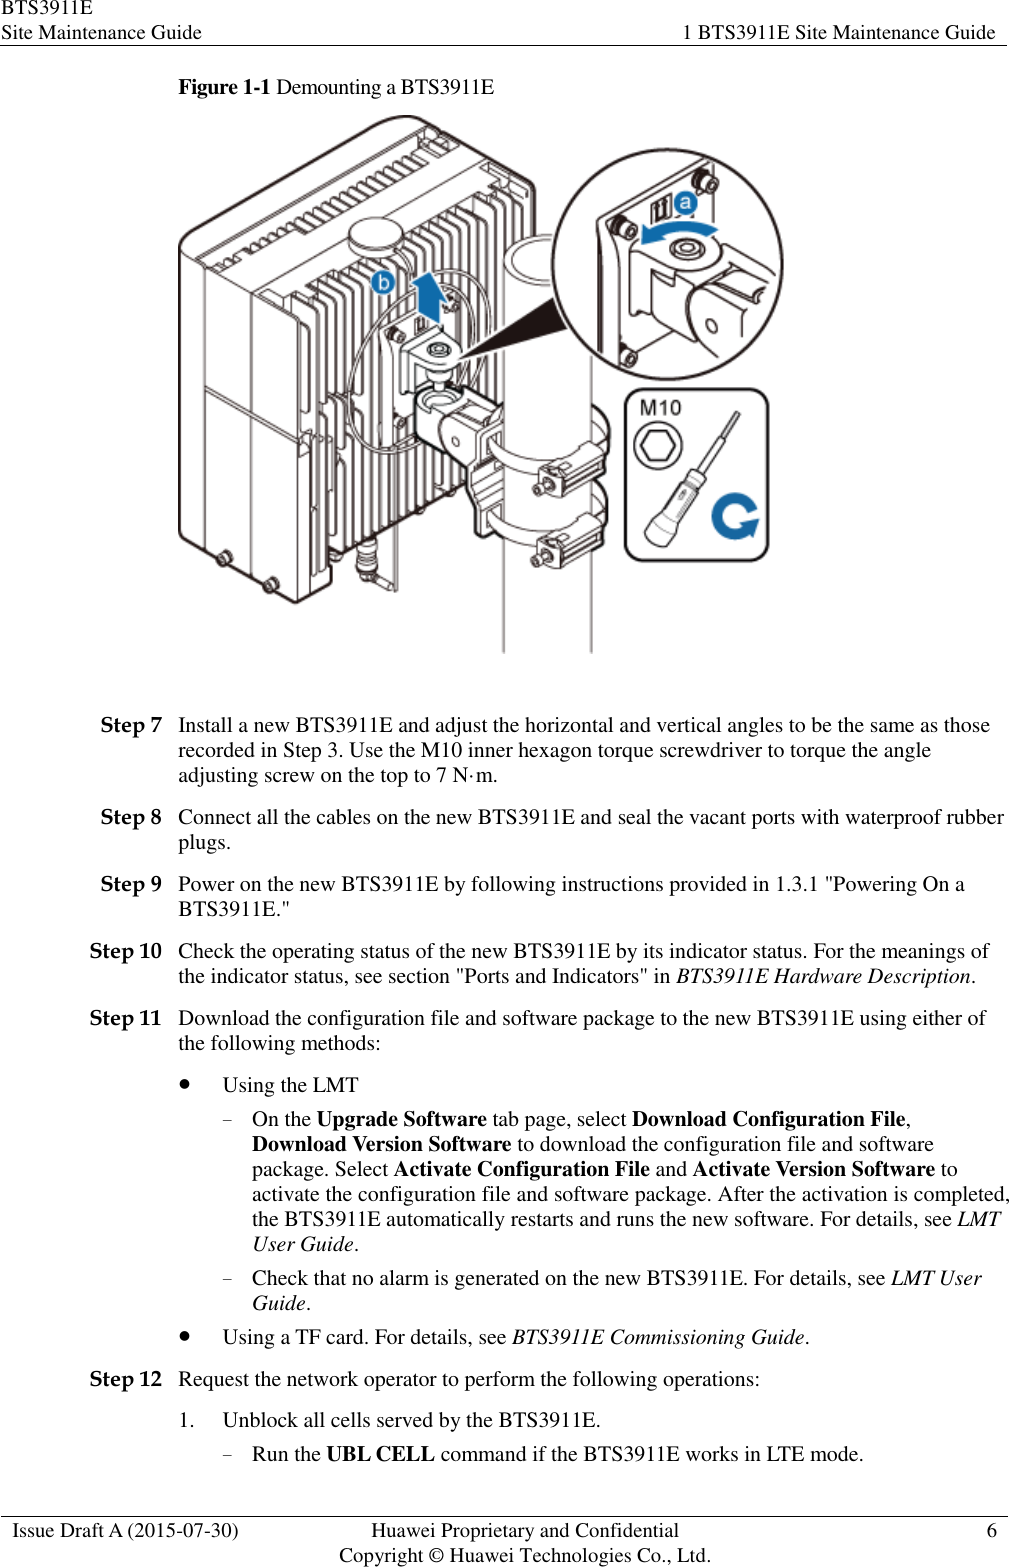 BTS3911E Site Maintenance Guide 1 BTS3911E Site Maintenance Guide  Issue Draft A (2015-07-30) Huawei Proprietary and Confidential           Copyright © Huawei Technologies Co., Ltd. 6  Figure 1-1 Demounting a BTS3911E   Step 7 Install a new BTS3911E and adjust the horizontal and vertical angles to be the same as those recorded in Step 3. Use the M10 inner hexagon torque screwdriver to torque the angle adjusting screw on the top to 7 N·m. Step 8 Connect all the cables on the new BTS3911E and seal the vacant ports with waterproof rubber plugs. Step 9 Power on the new BTS3911E by following instructions provided in 1.3.1 &quot;Powering On a BTS3911E.&quot; Step 10 Check the operating status of the new BTS3911E by its indicator status. For the meanings of the indicator status, see section &quot;Ports and Indicators&quot; in BTS3911E Hardware Description.   Step 11 Download the configuration file and software package to the new BTS3911E using either of the following methods:  Using the LMT − On the Upgrade Software tab page, select Download Configuration File, Download Version Software to download the configuration file and software package. Select Activate Configuration File and Activate Version Software to activate the configuration file and software package. After the activation is completed, the BTS3911E automatically restarts and runs the new software. For details, see LMT User Guide. − Check that no alarm is generated on the new BTS3911E. For details, see LMT User Guide.  Using a TF card. For details, see BTS3911E Commissioning Guide. Step 12 Request the network operator to perform the following operations: 1. Unblock all cells served by the BTS3911E. − Run the UBL CELL command if the BTS3911E works in LTE mode. 